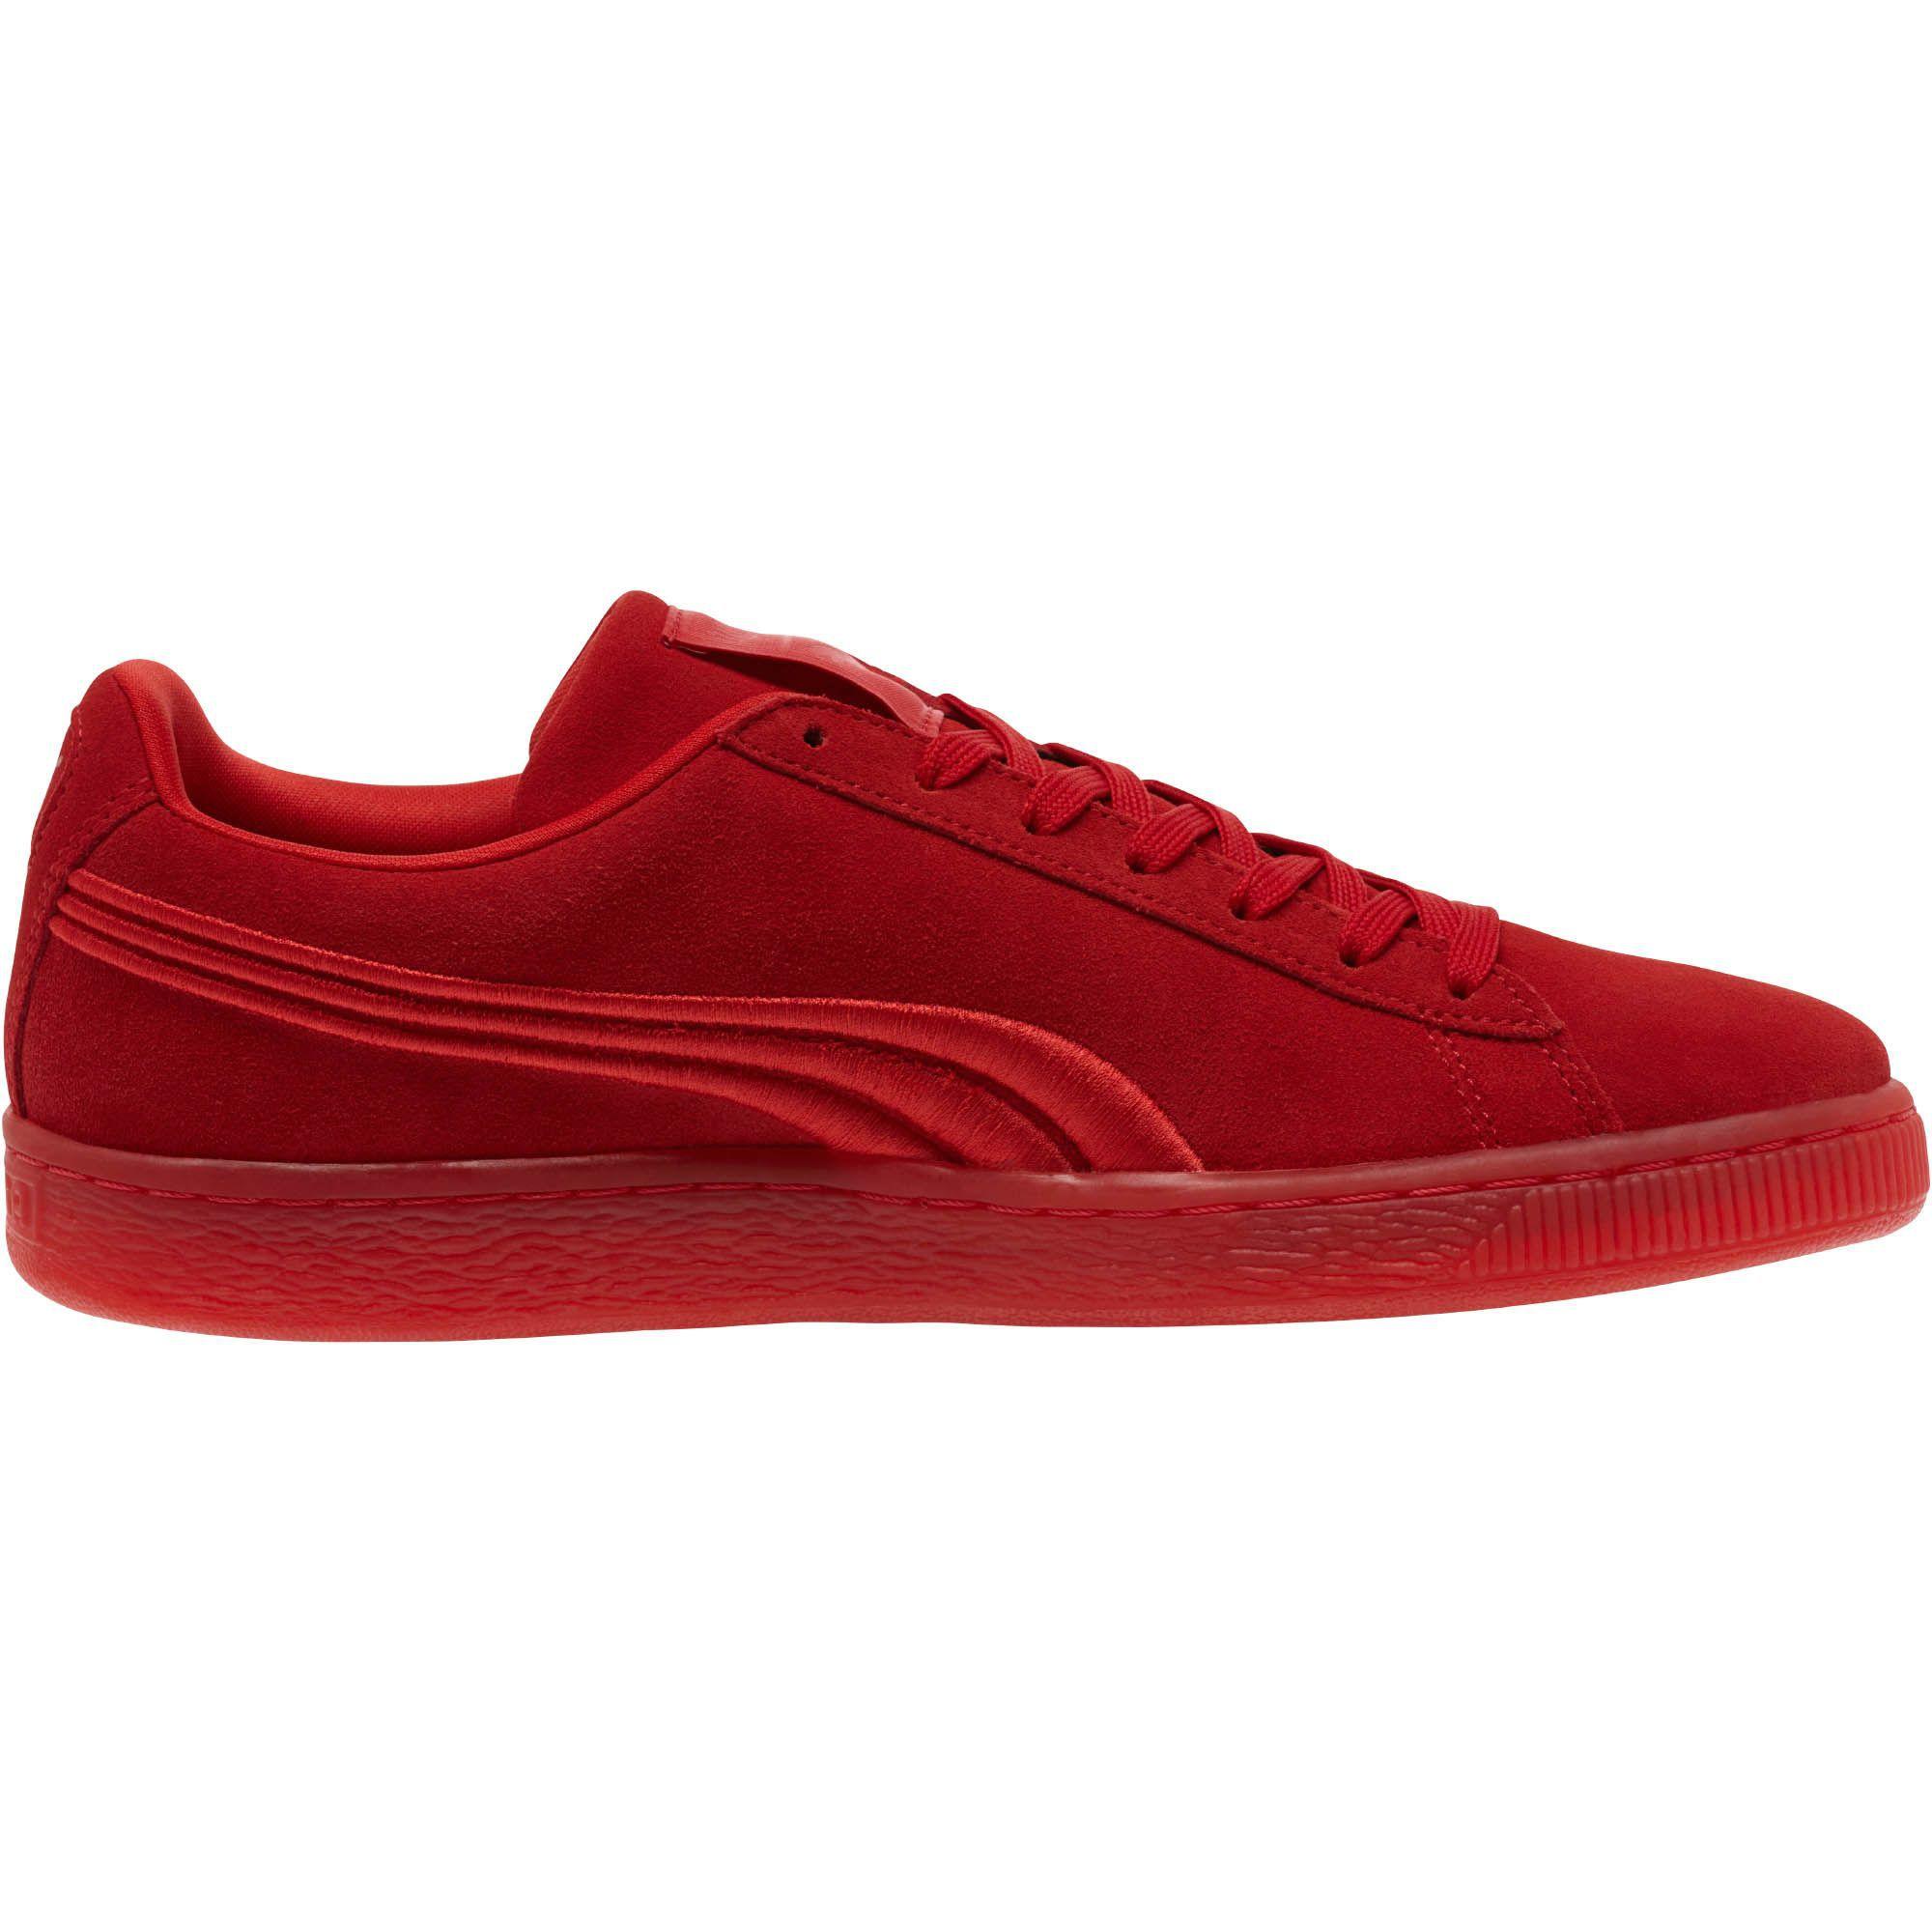 Lyst - Puma Suede Classic Badge Iced Men's Sneakers in Red for Men